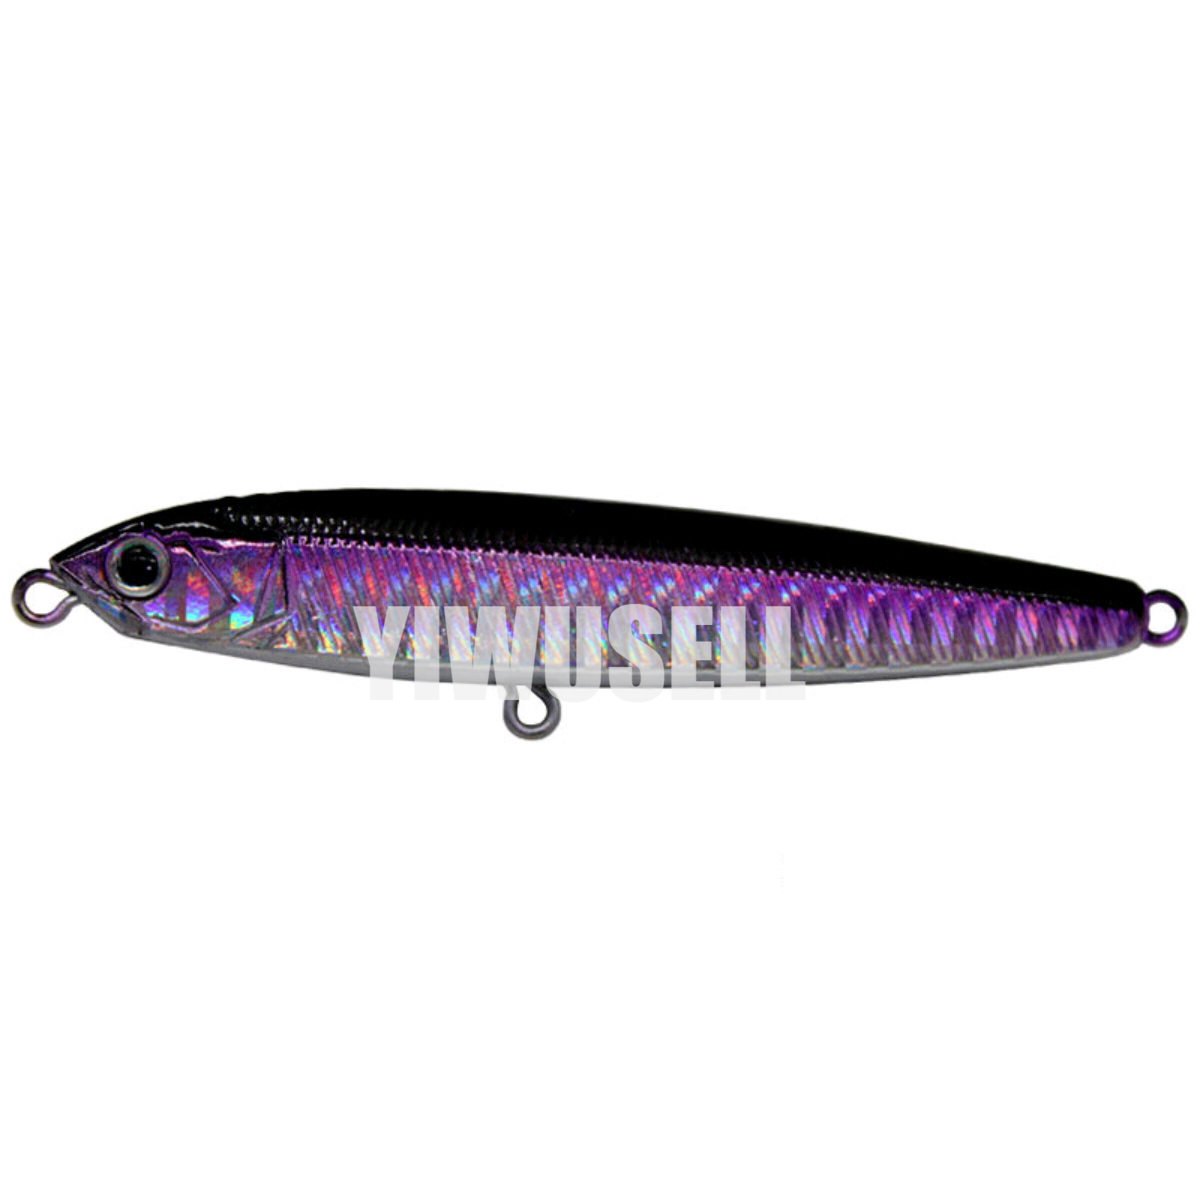 Best Fishing Lures for sale -  YIWUSELL, HOME, KITCHEN, PET, CAMPING, STATIONERY, TOOLS